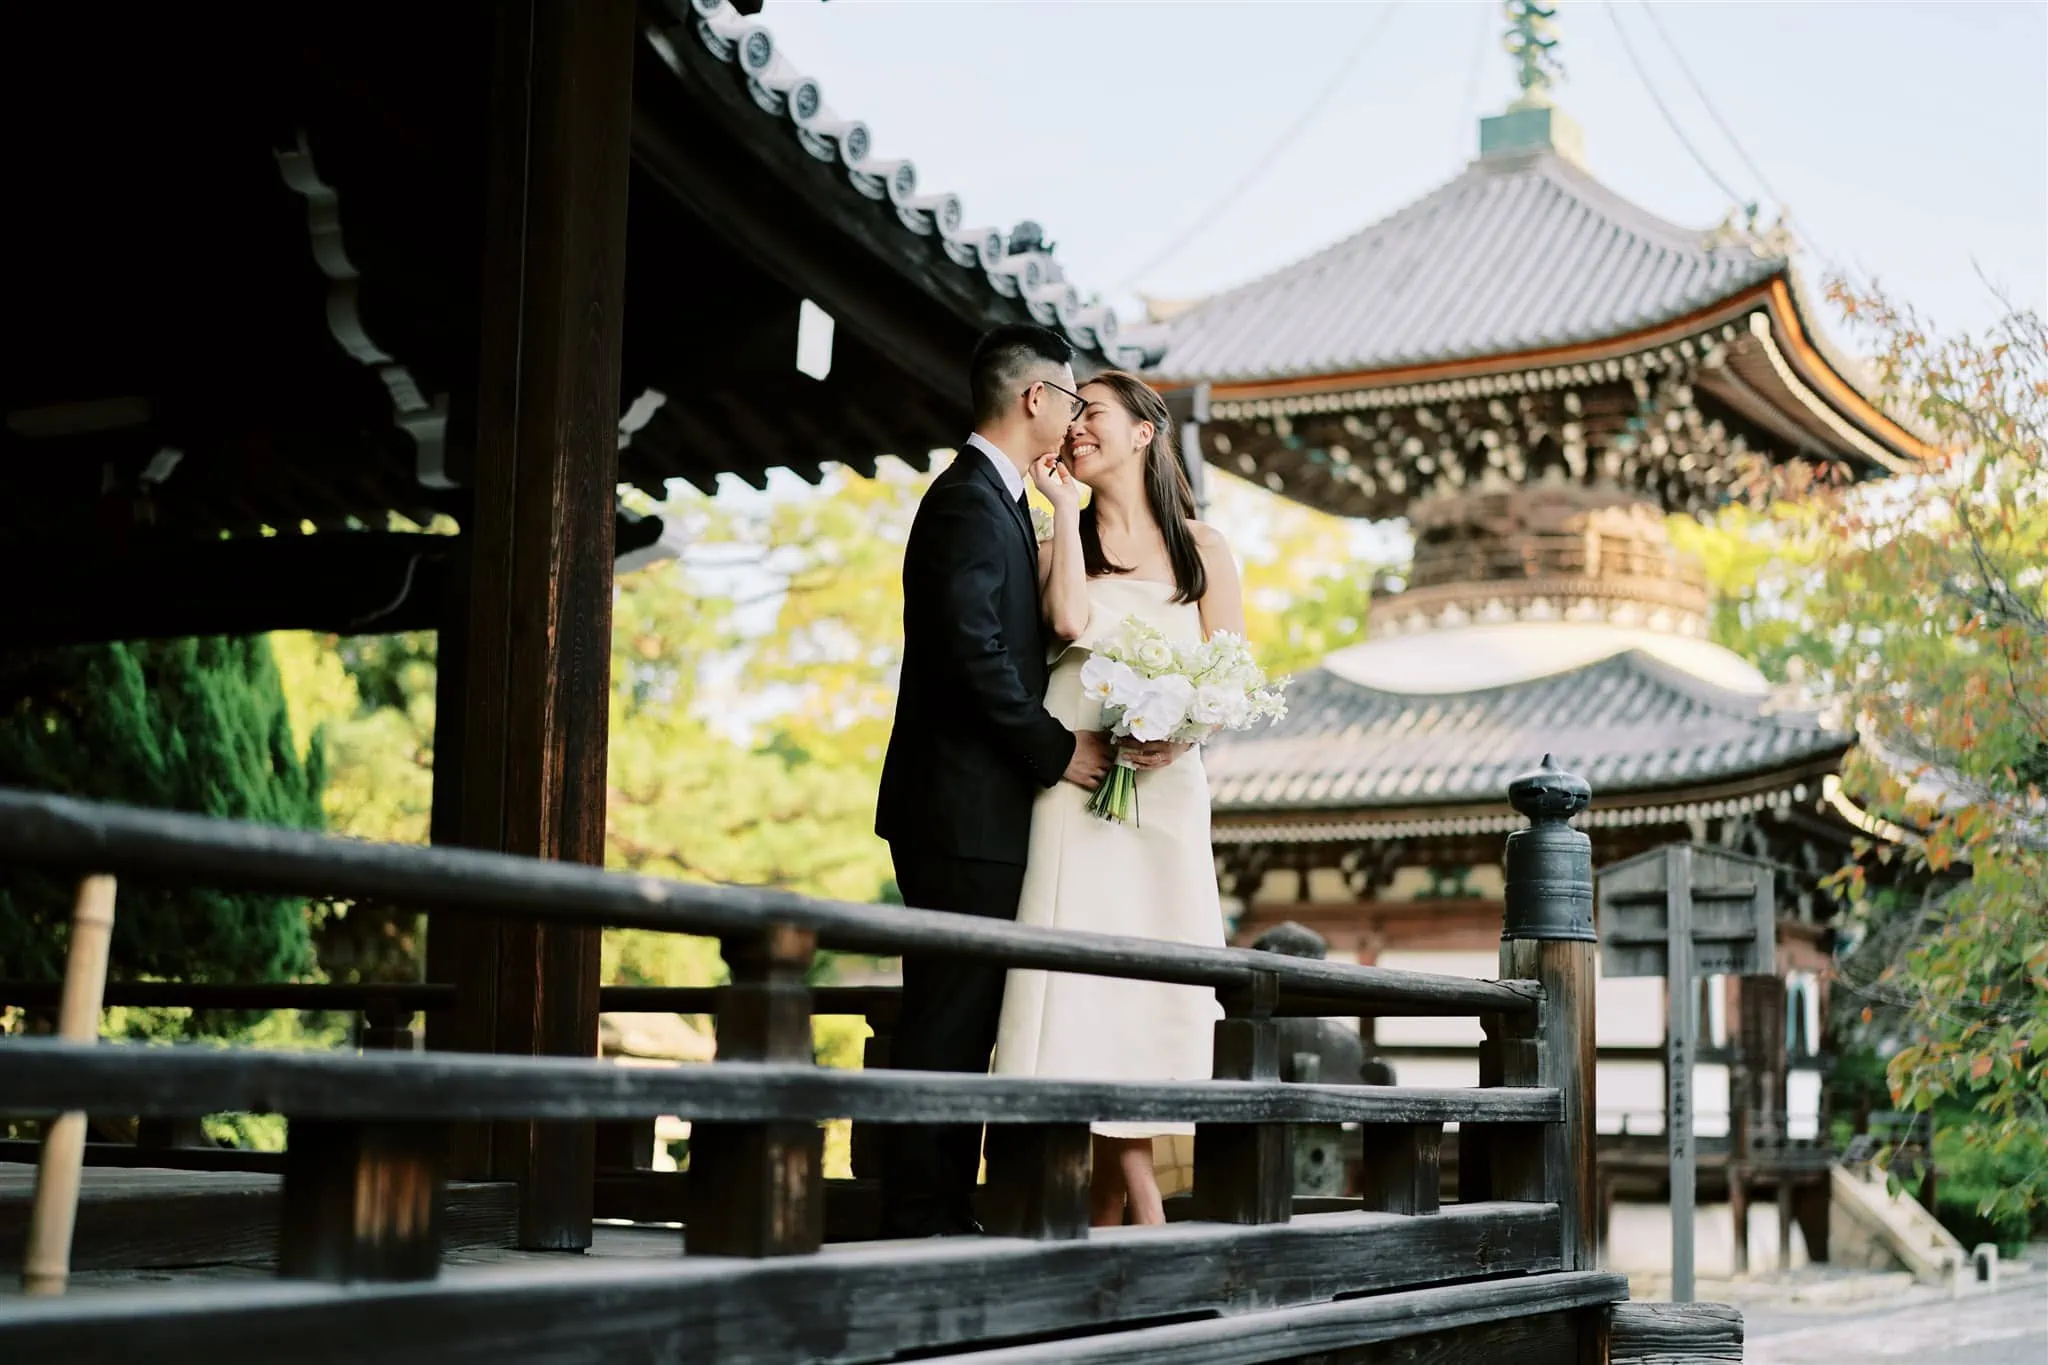 Kyoto Tokyo Japan Elopement Wedding Photographer, Planner & Videographer | A bride and groom kiss in front of a pagoda during their enchanting Japan elopement.